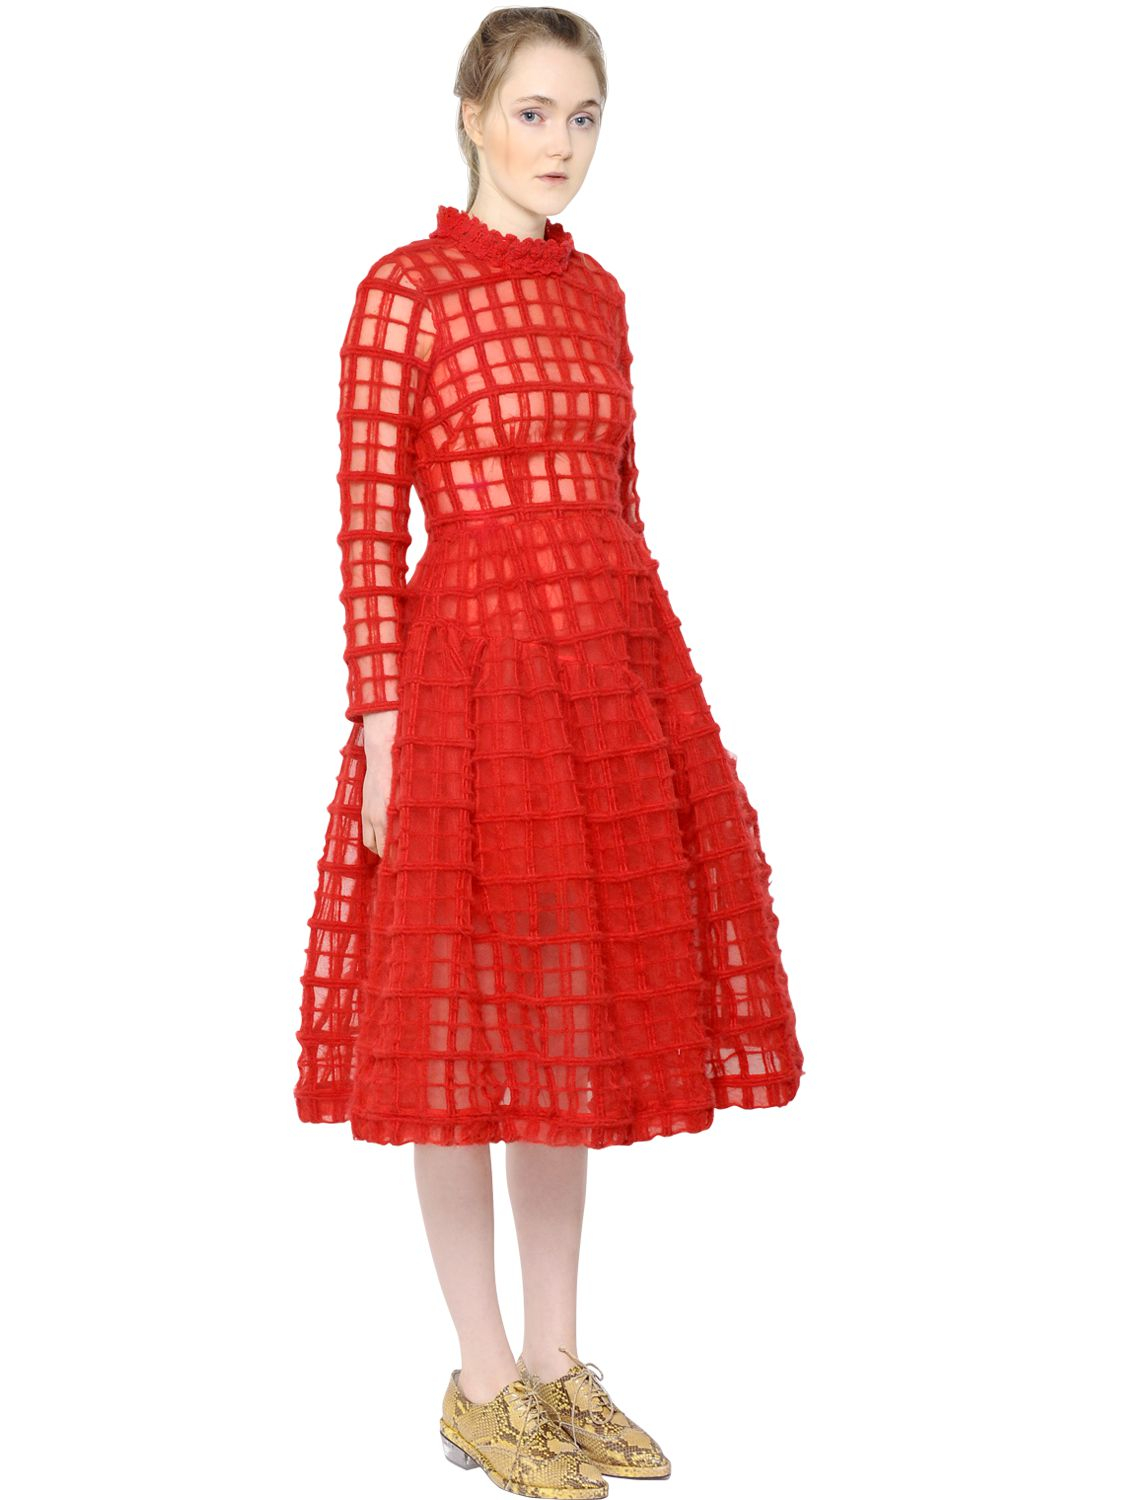 Lyst - Simone Rocha Brushed Wool Tulle Dress in Red